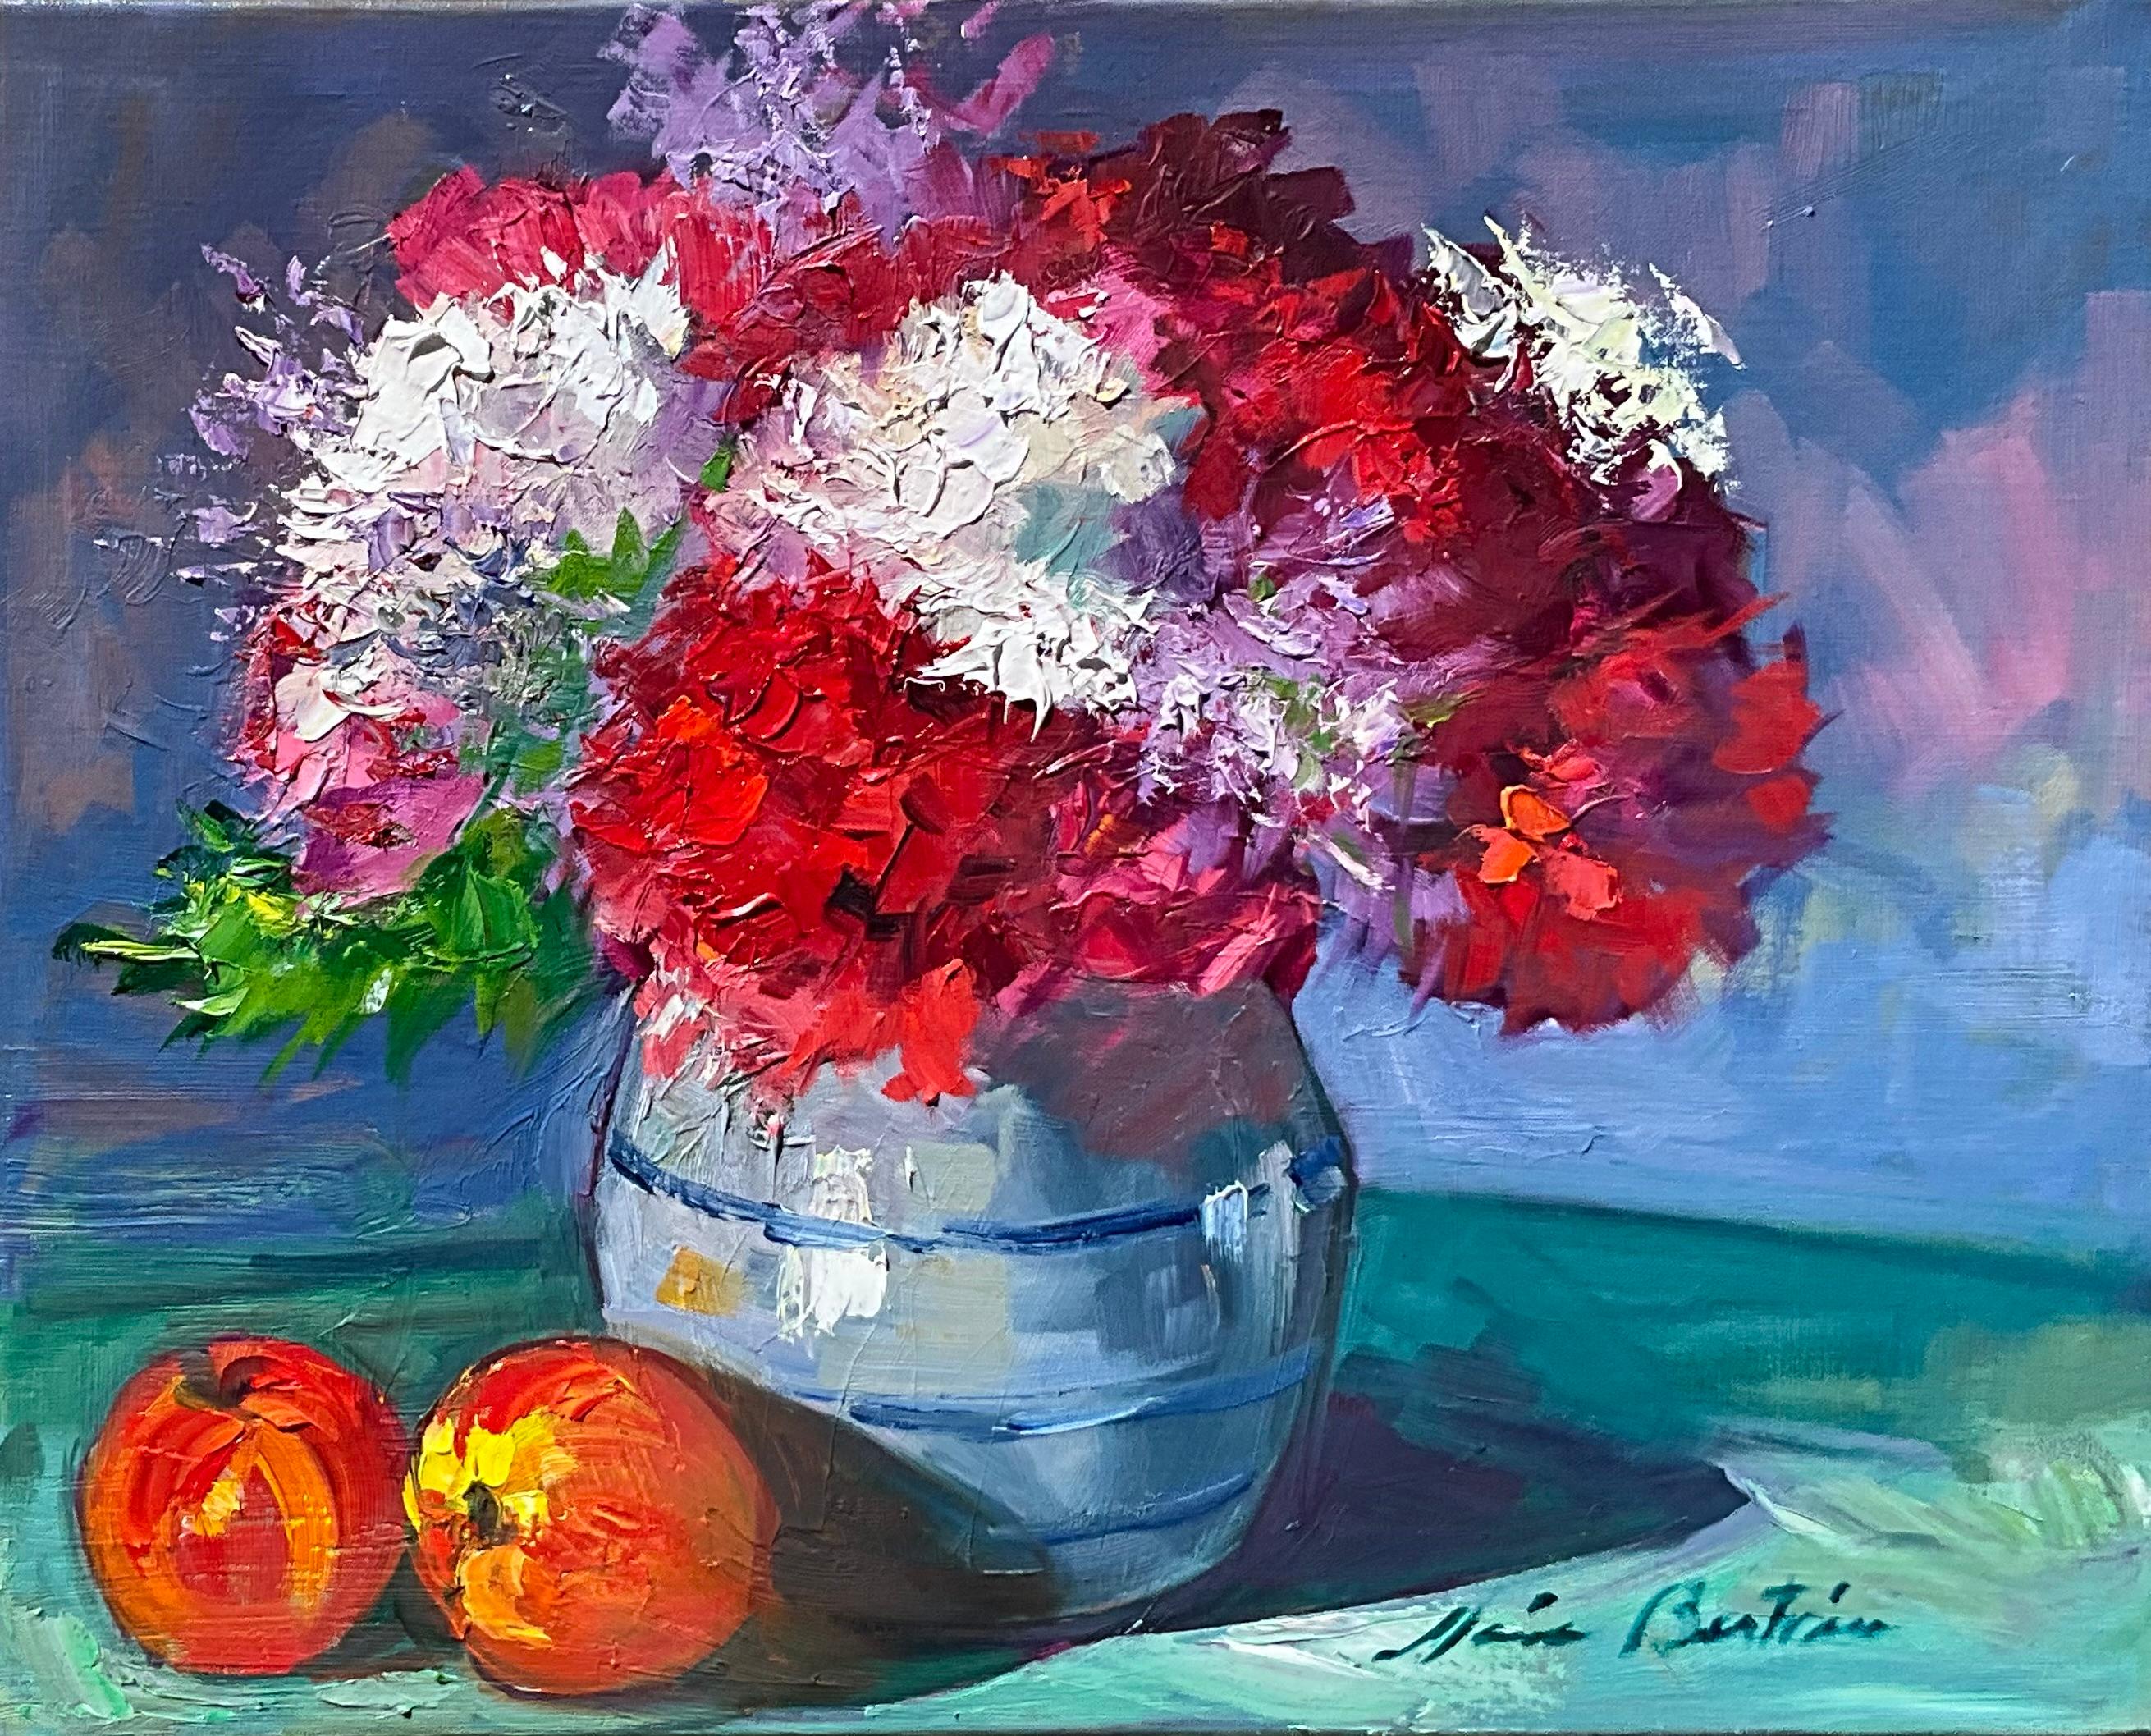 "White and Red Peonies" Contemporary Impressionist Still Life Oil